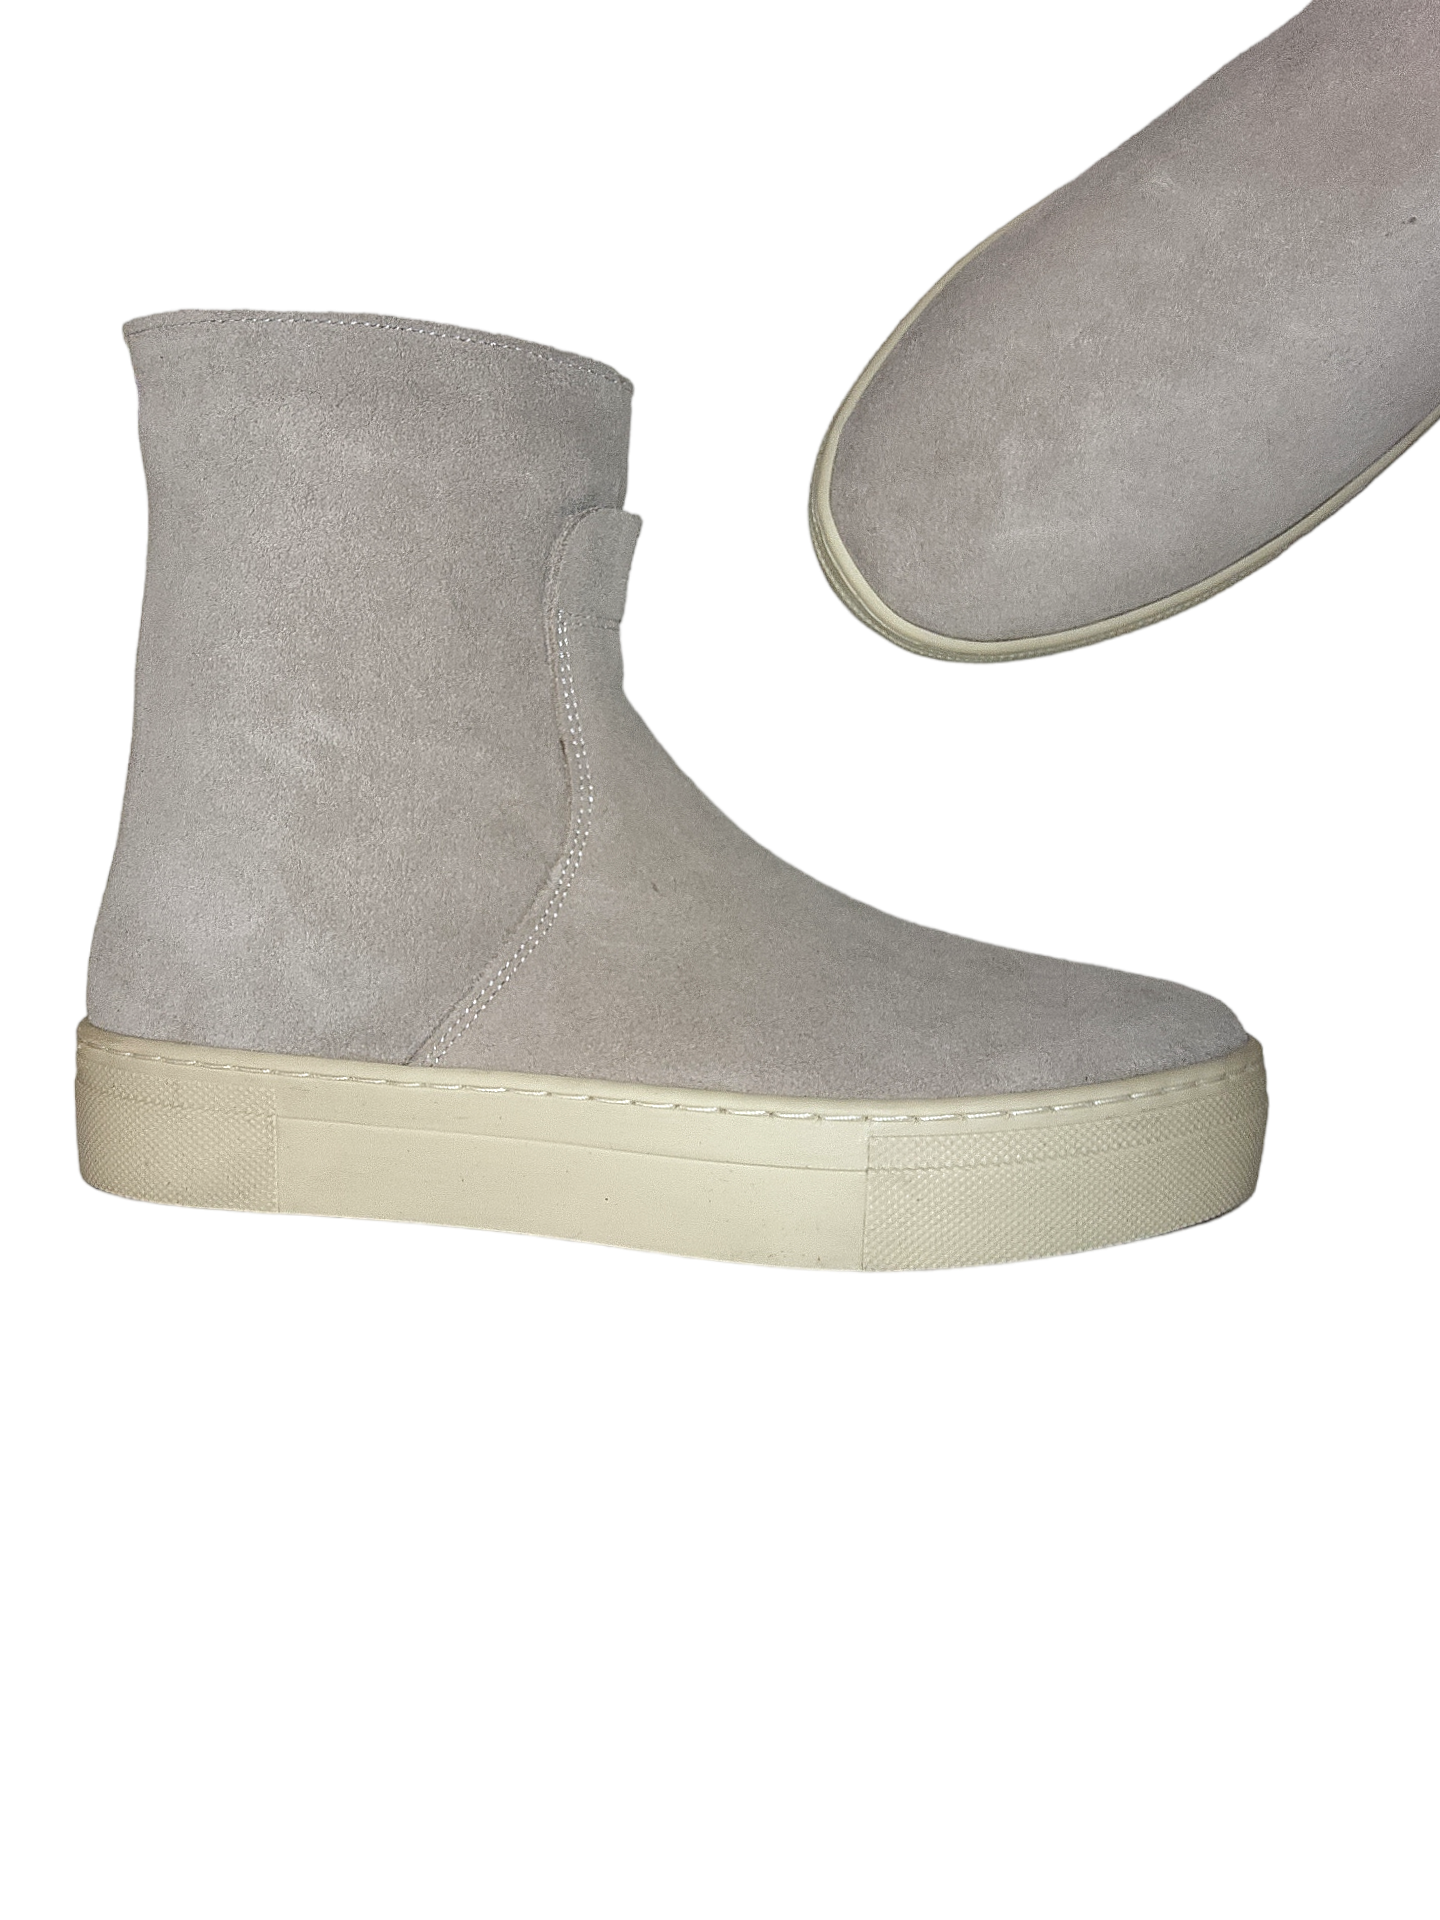 Grey suede leather boots